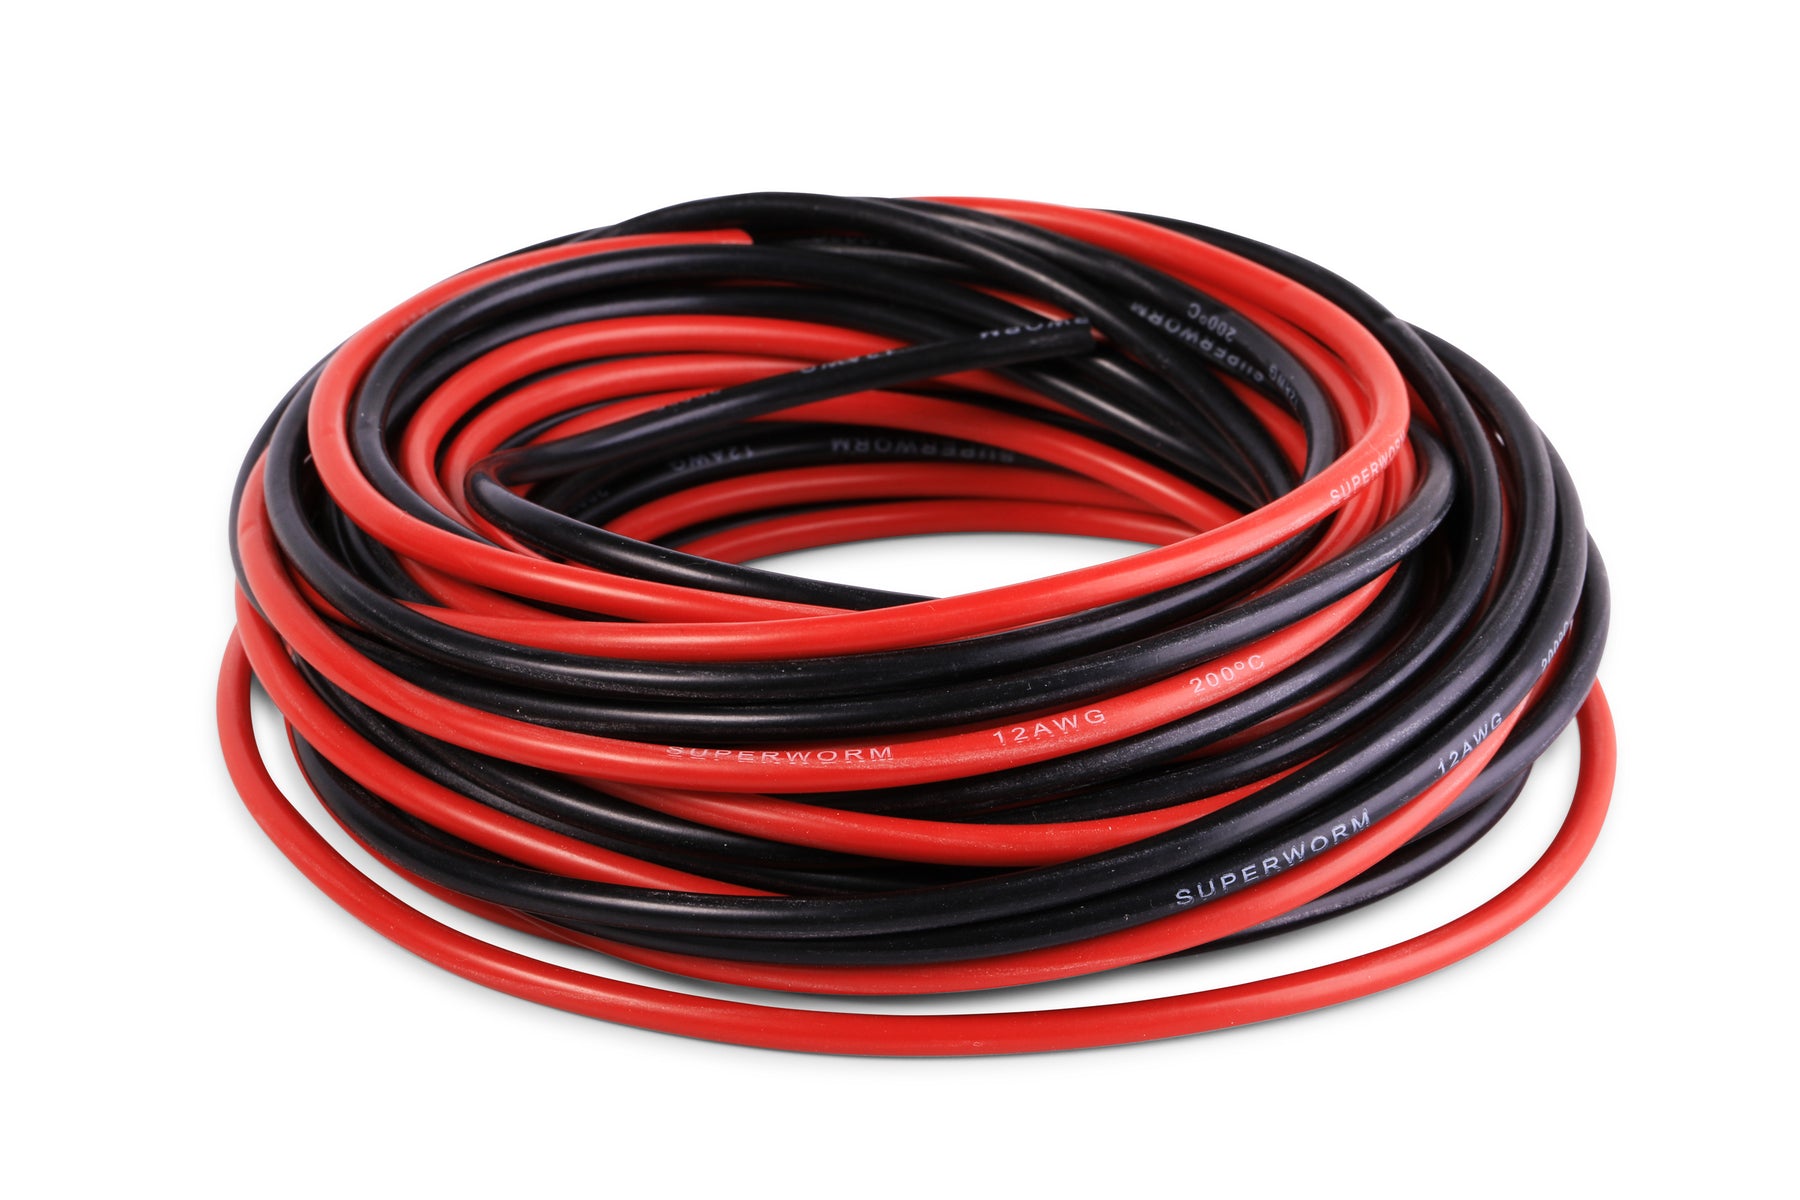 BNTECHGO 30 Gauge Silicone Wire Spool Red and Black Each 25ft 2 Separate  Wires Flexible 30 AWG Stranded Tinned Copper Wire